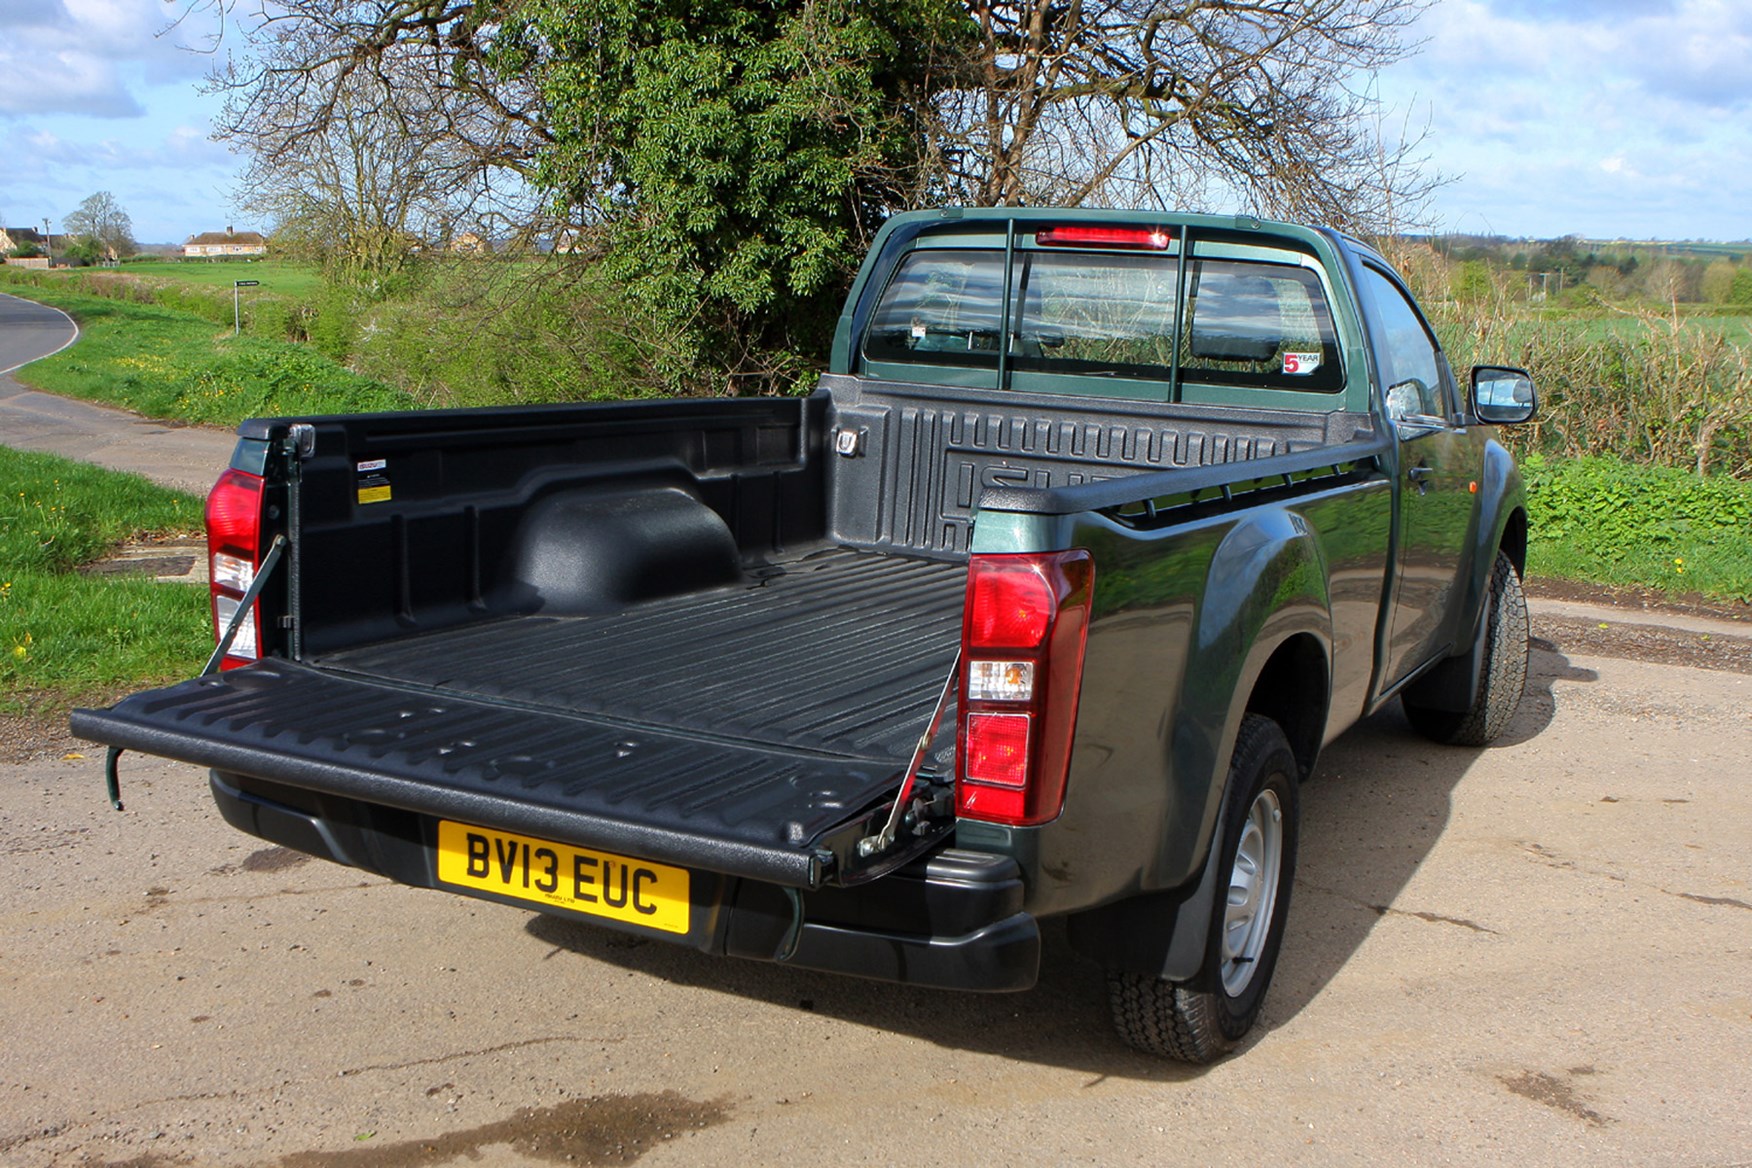 Isuzu D-Max full review on Parkers Vans - load area capacity